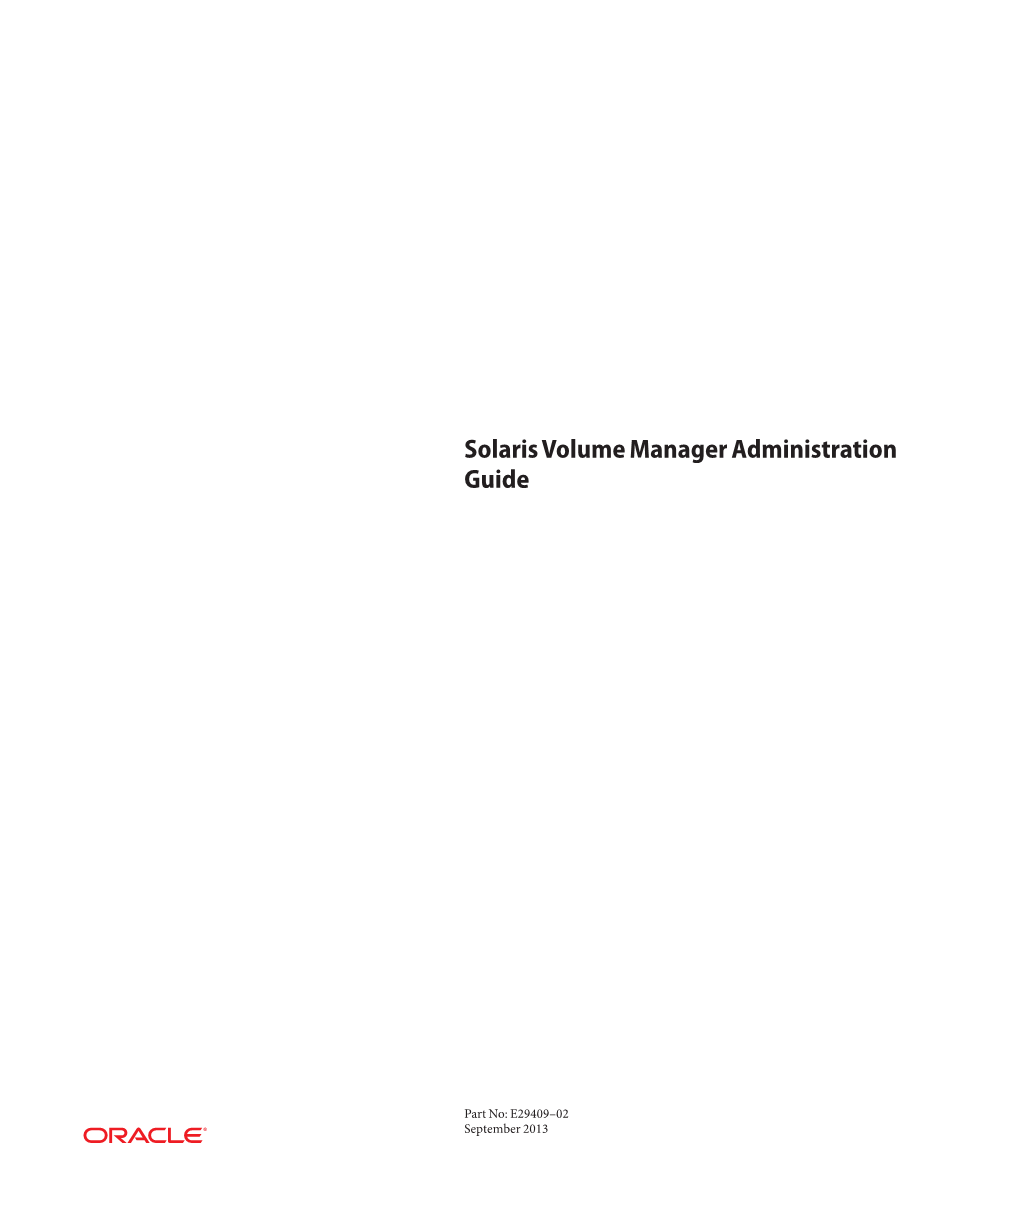 Solaris Volume Manager Administration Guide Explains How to Use Solaris Volume Manager to Manage Your System's Storage Needs